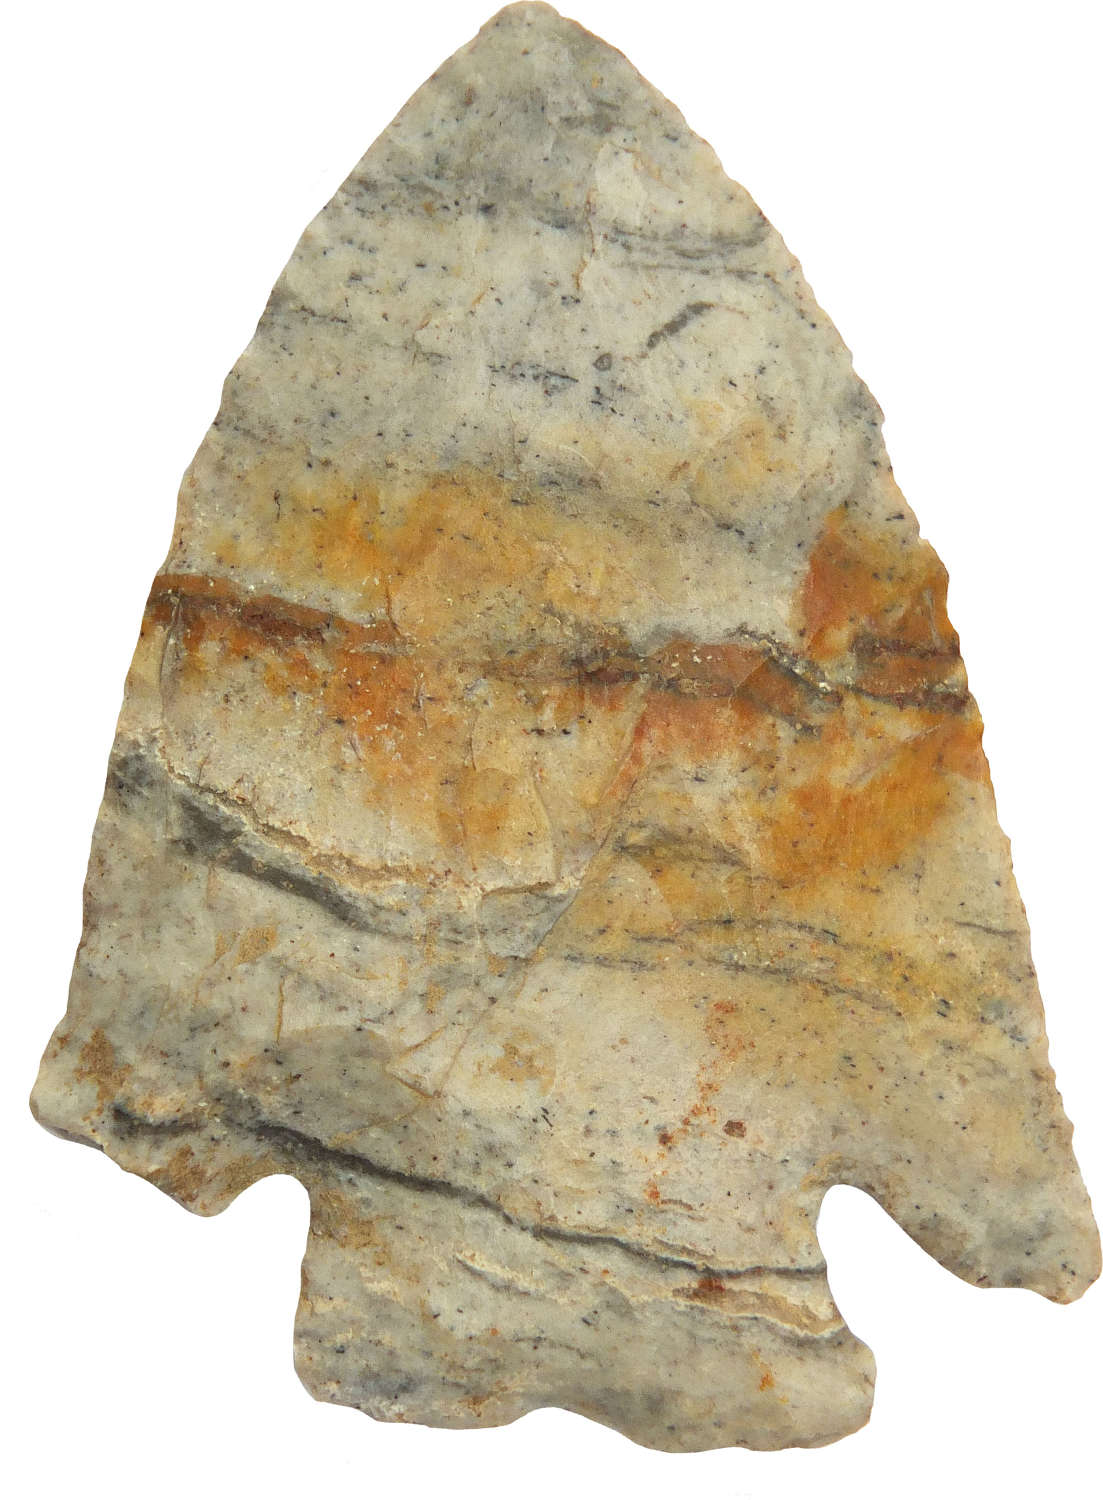 A North American Indian Archaic corner notched stone point